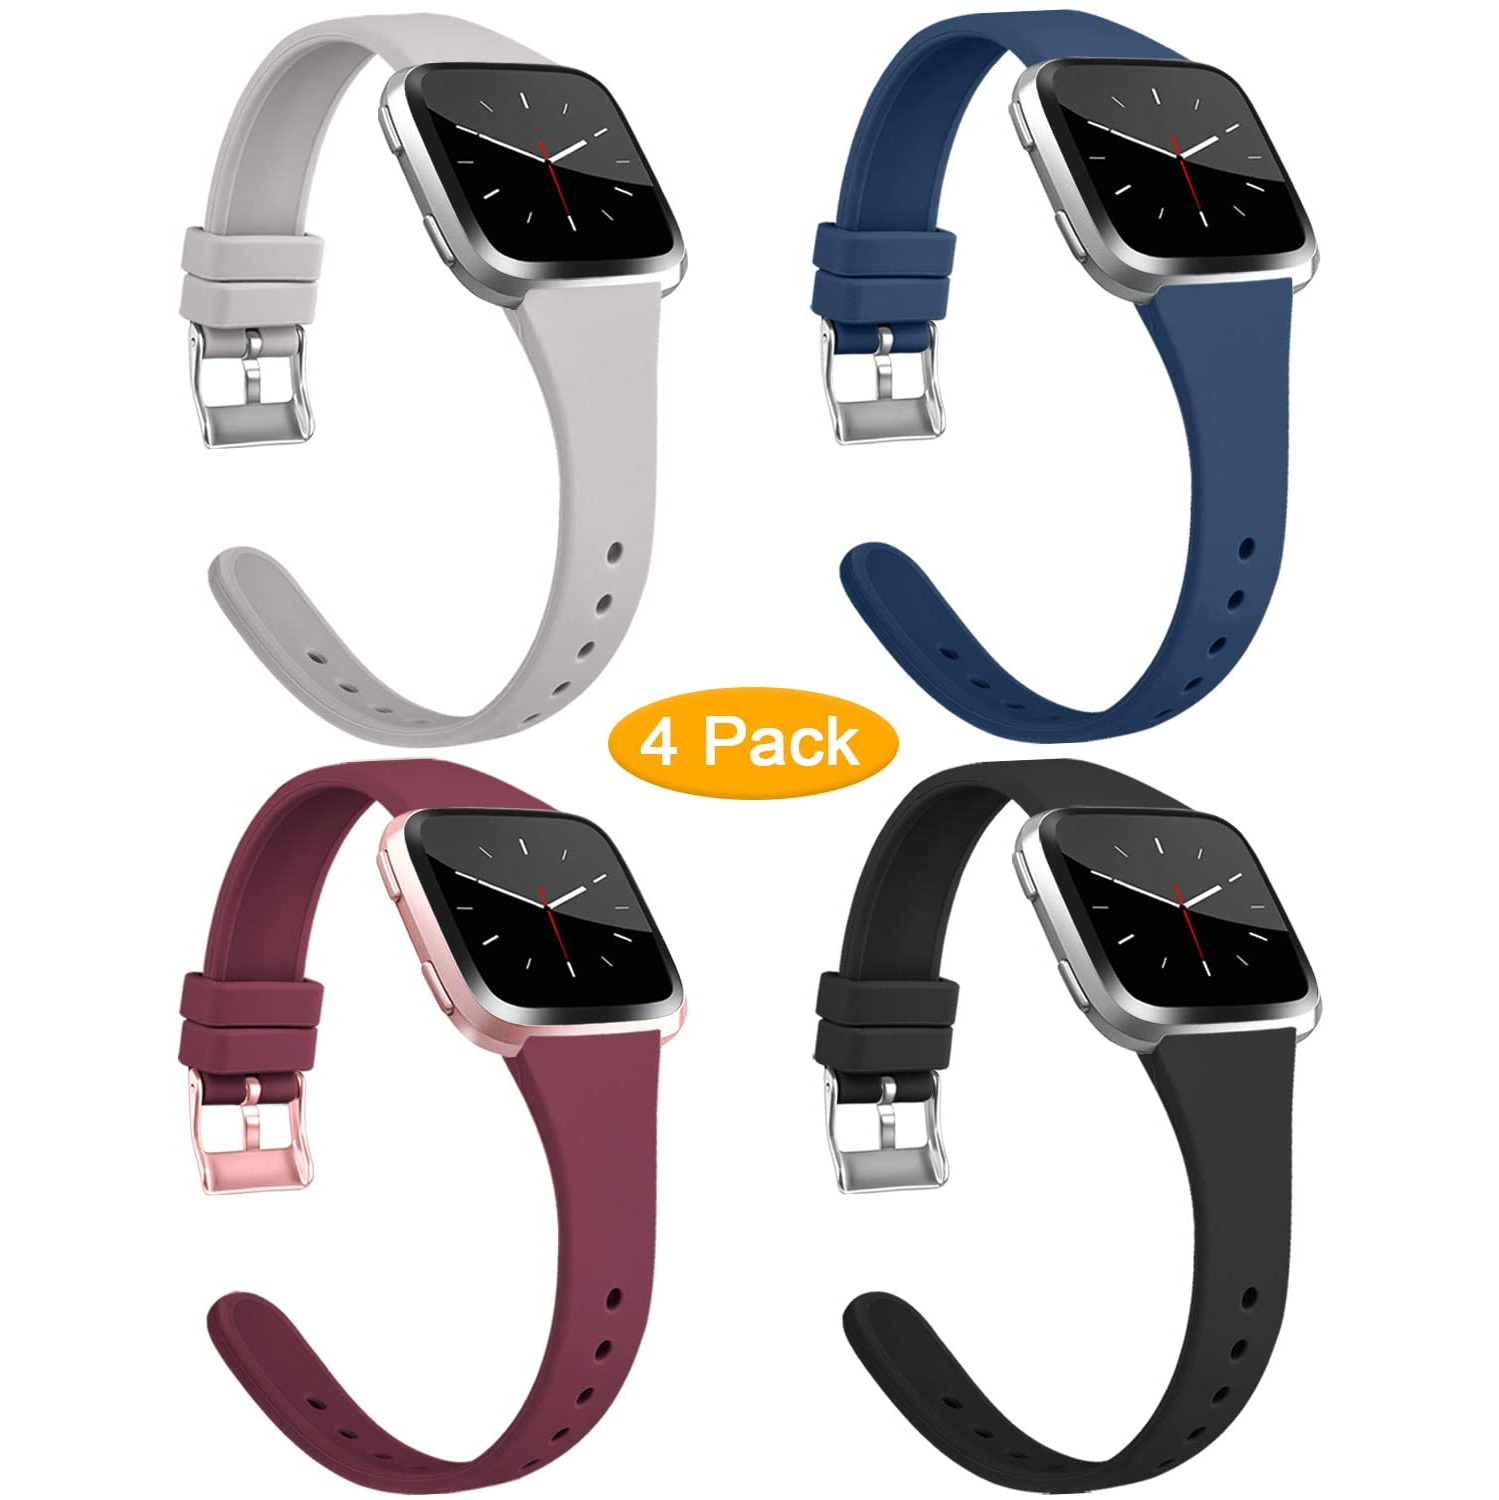 fitbit thin band